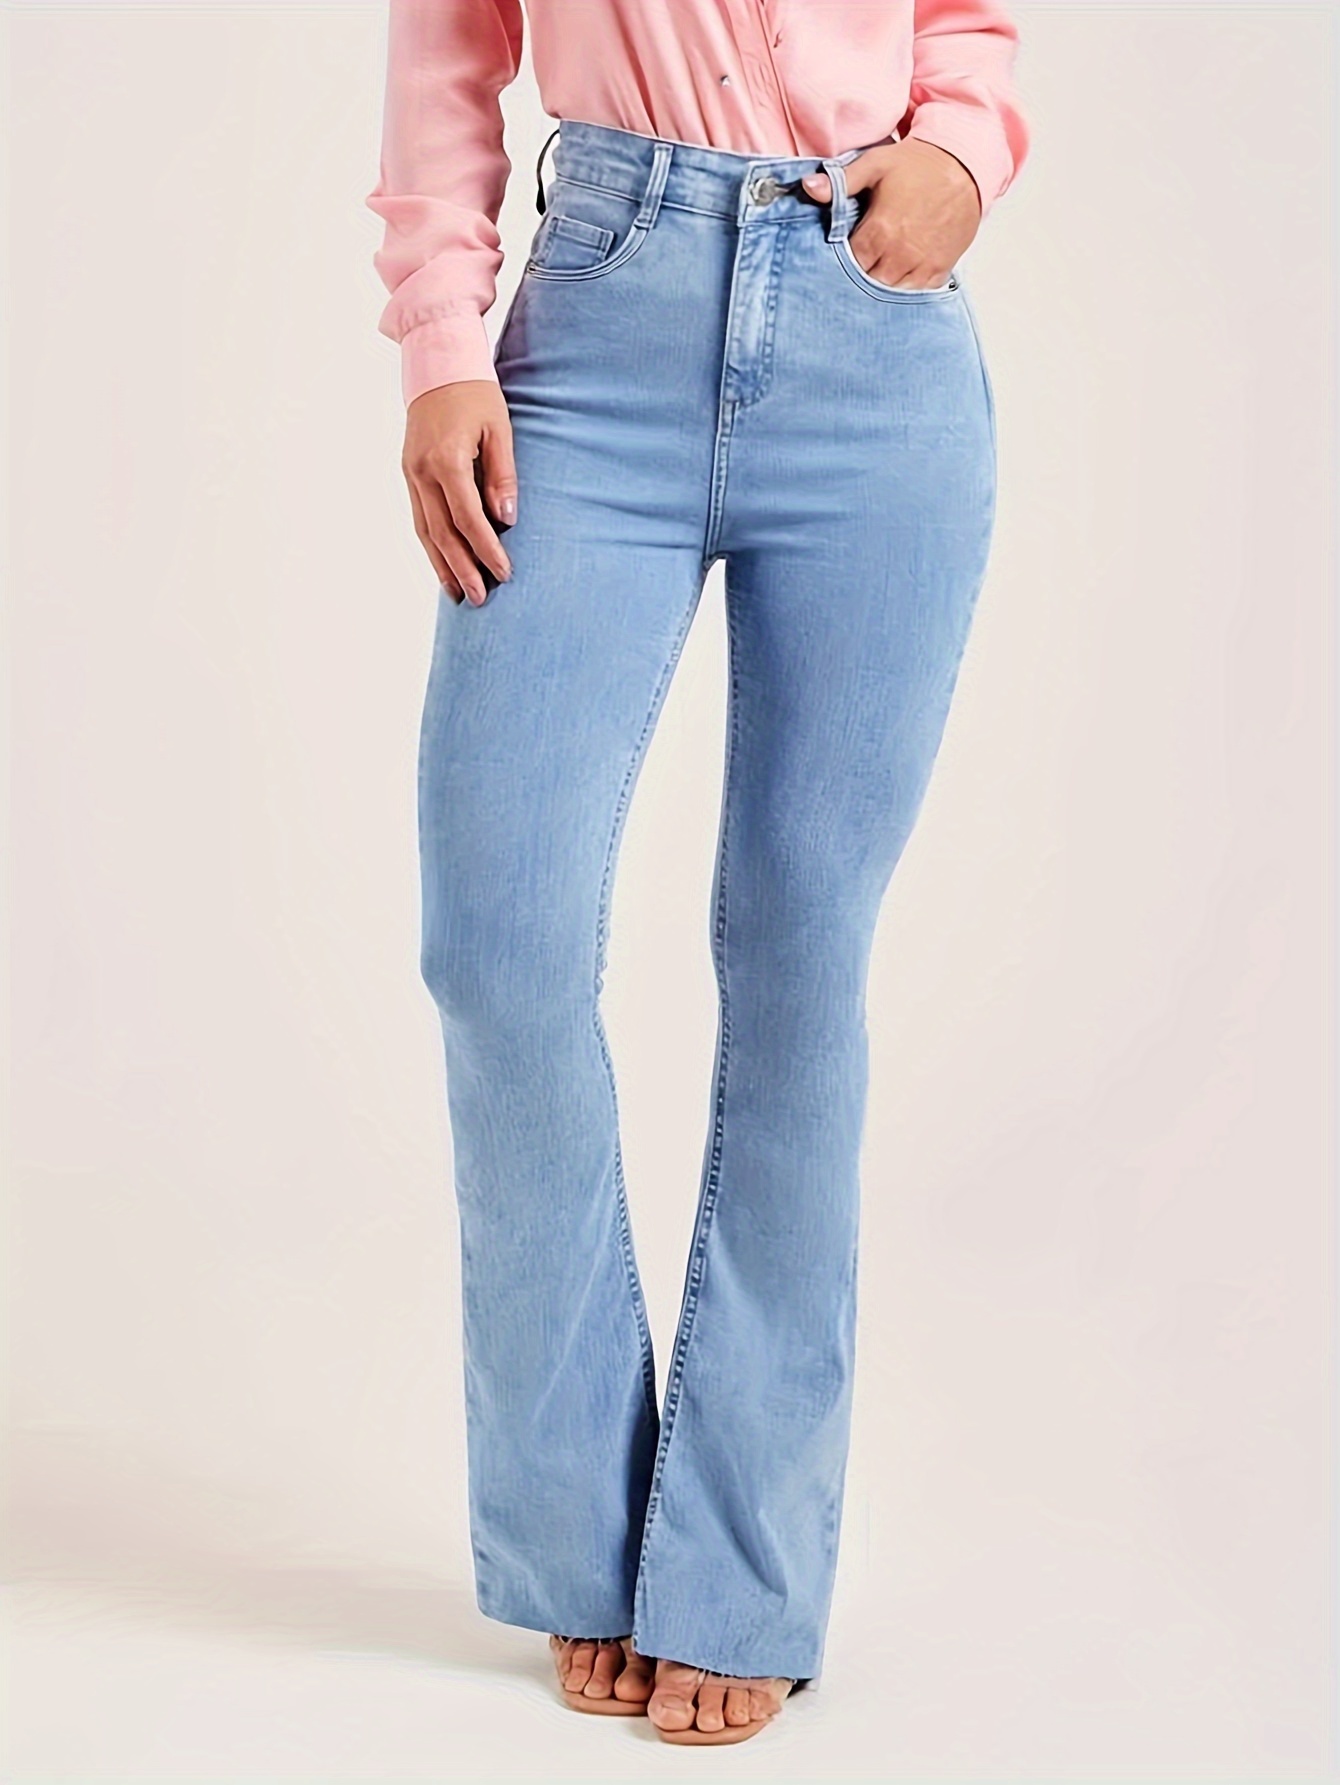 Solid Color Zip Fly Flare Denim Pants, High Rise Slash Pocket Slim Fit  Female's Trousers, Classic Casual Chic Style, Women's Denim Jeans & Clothing